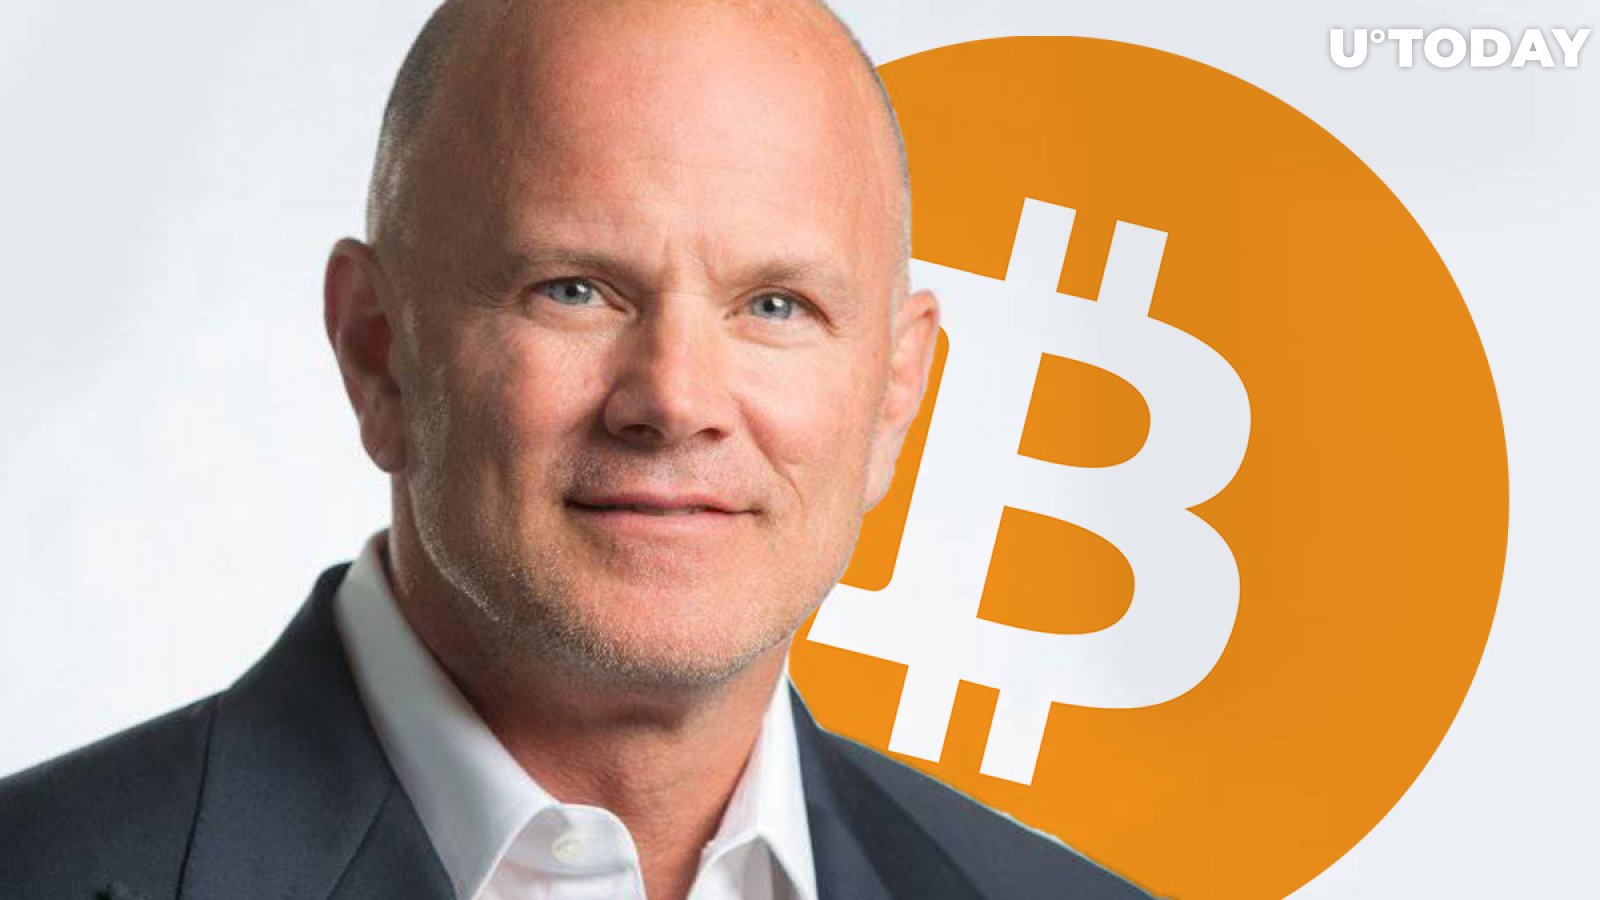 Mike Novogratz Wants to Give Away Most of His Bitcoin to Charity